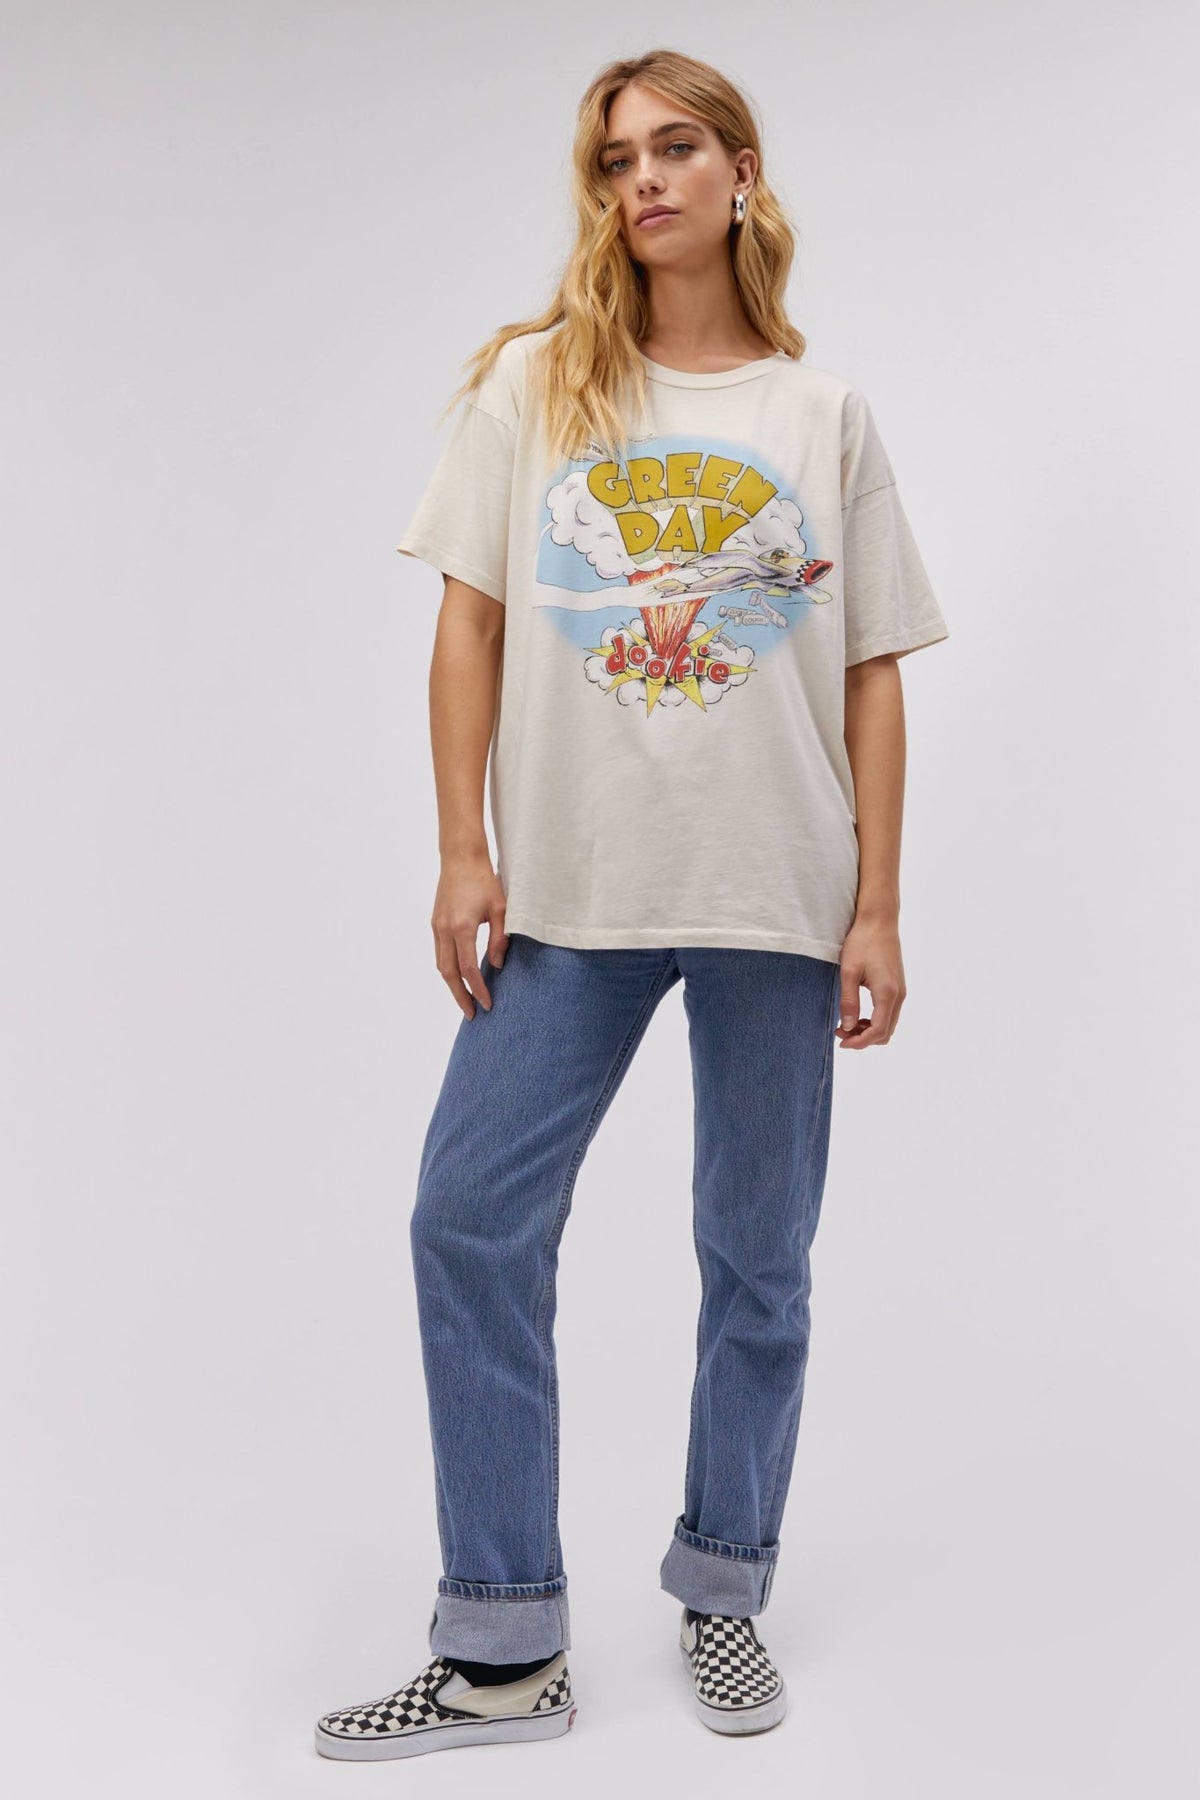 Daydreamer Graphic T-shirt | Green Day Dookie | Merch Tee - Women&#39;s Shirts &amp; Tops - Blooming Daily